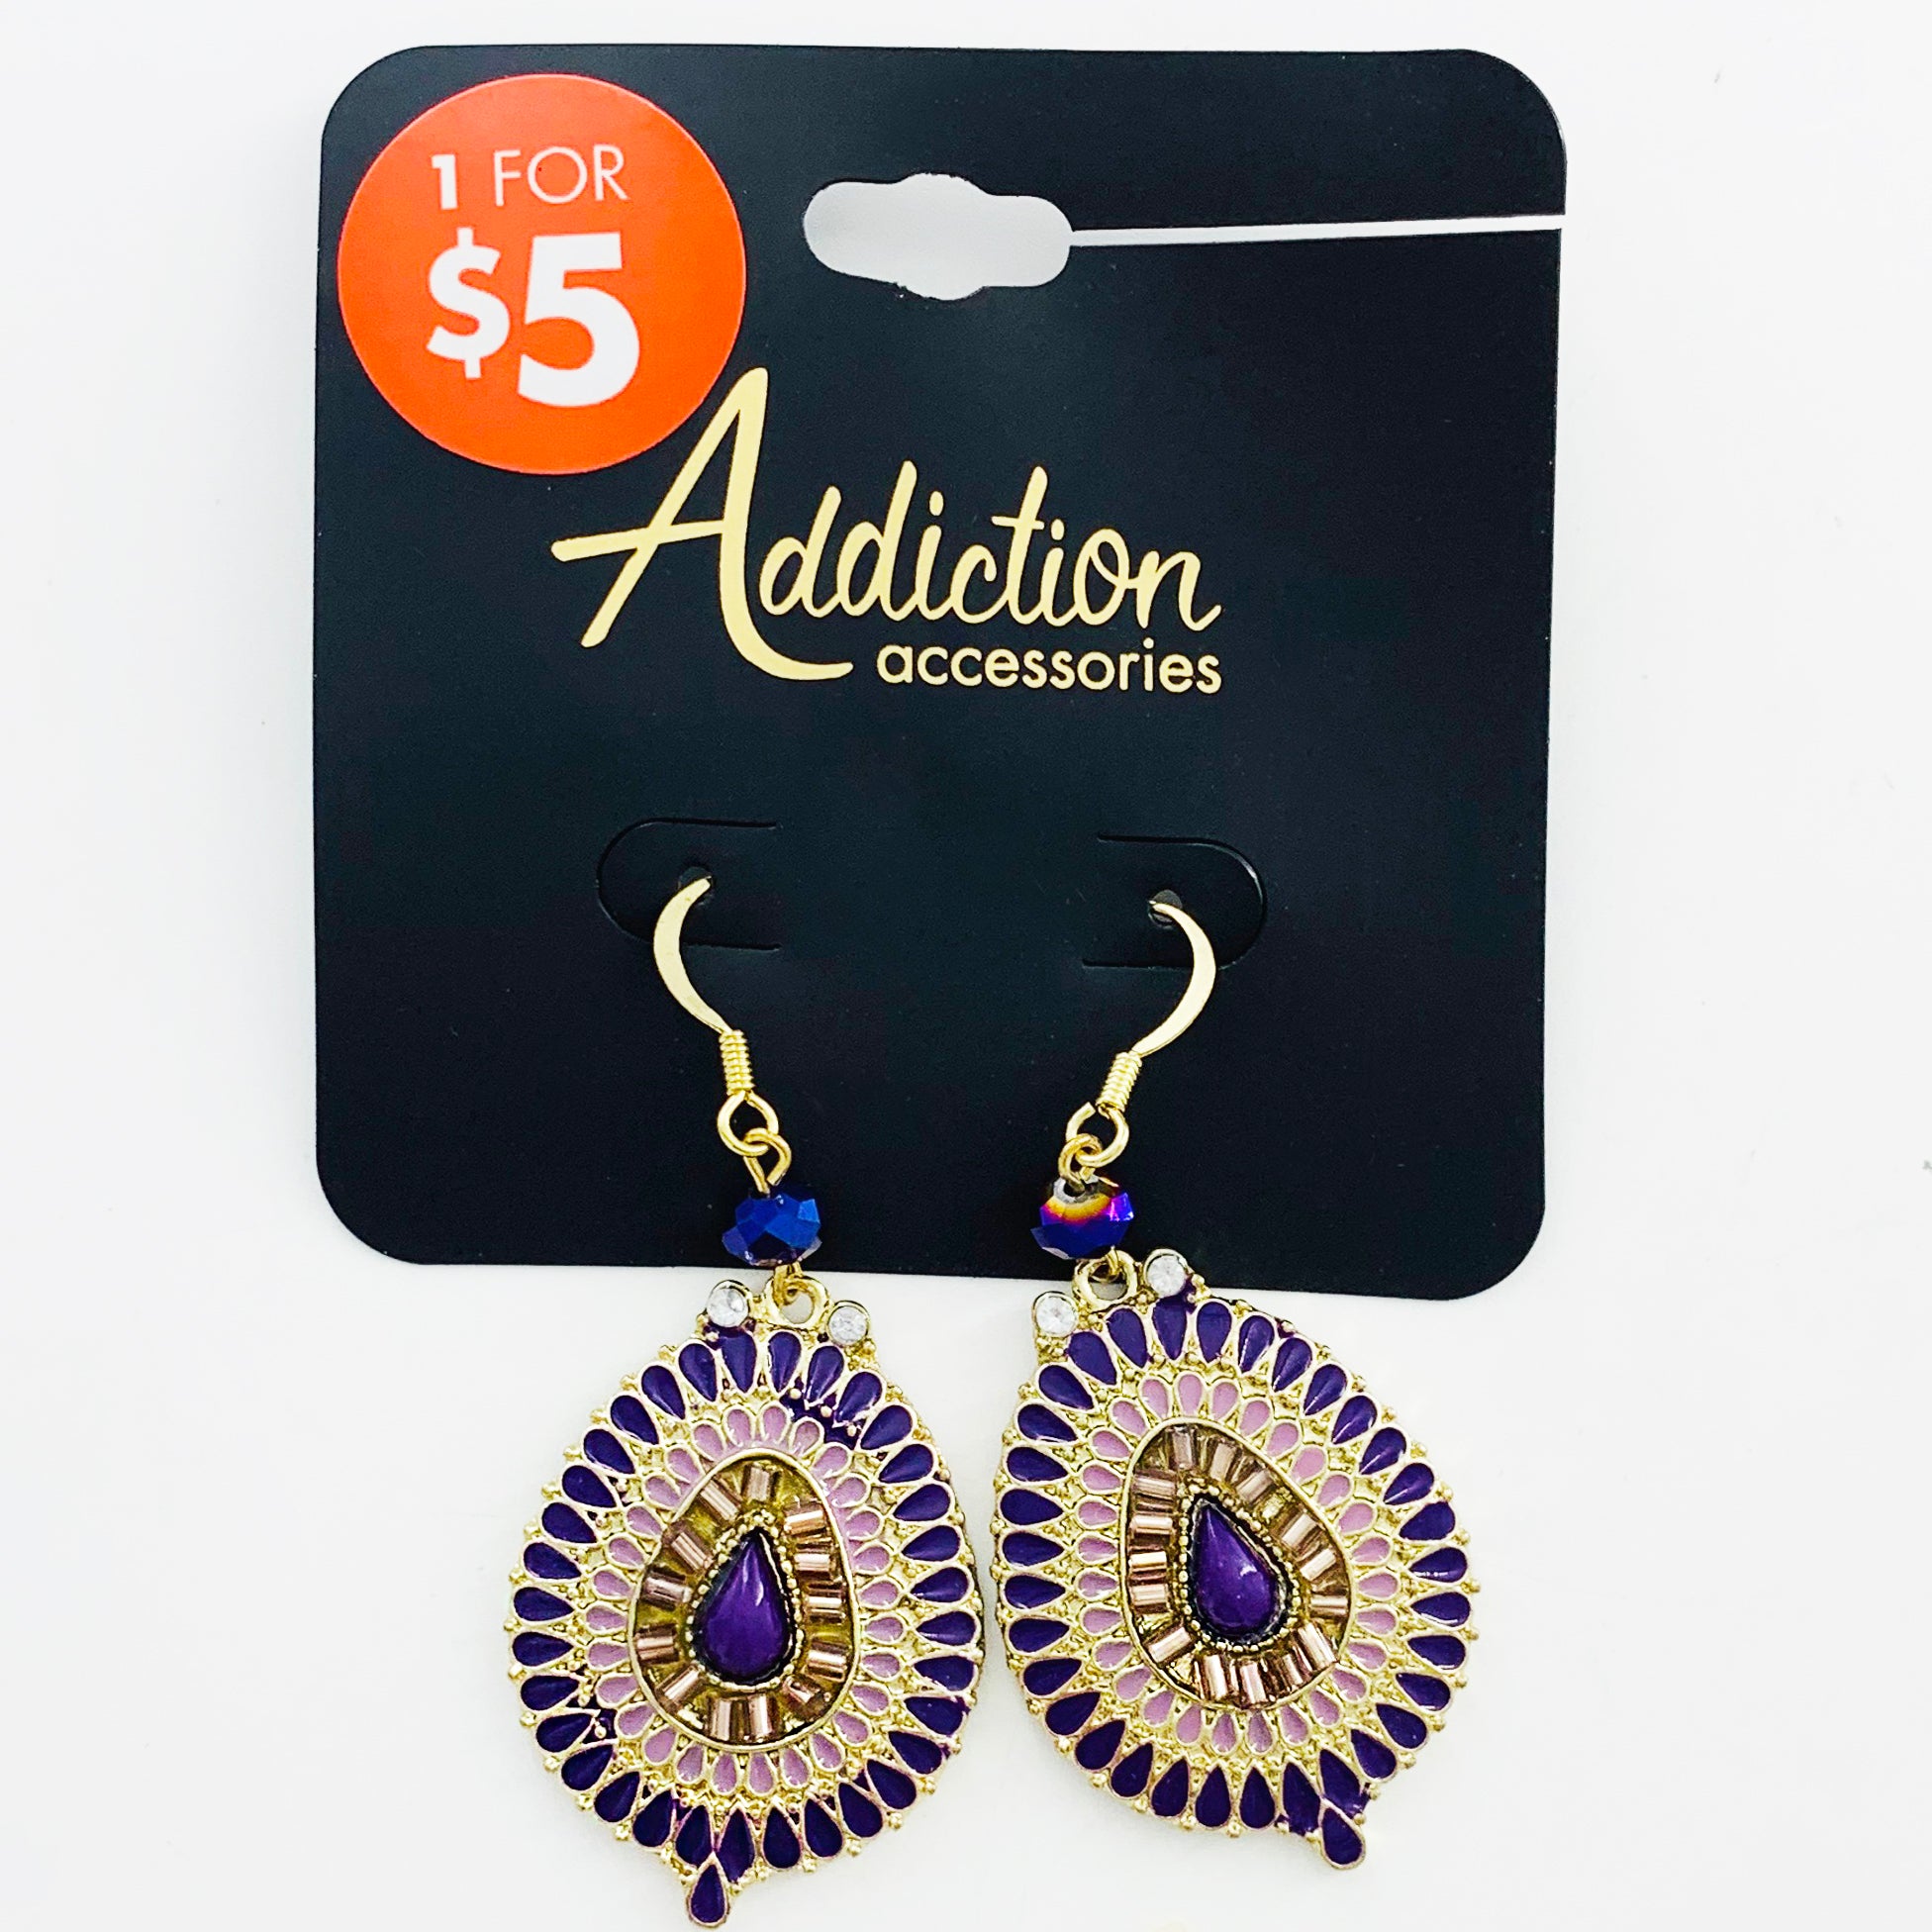 Gold earrings with shades of purple